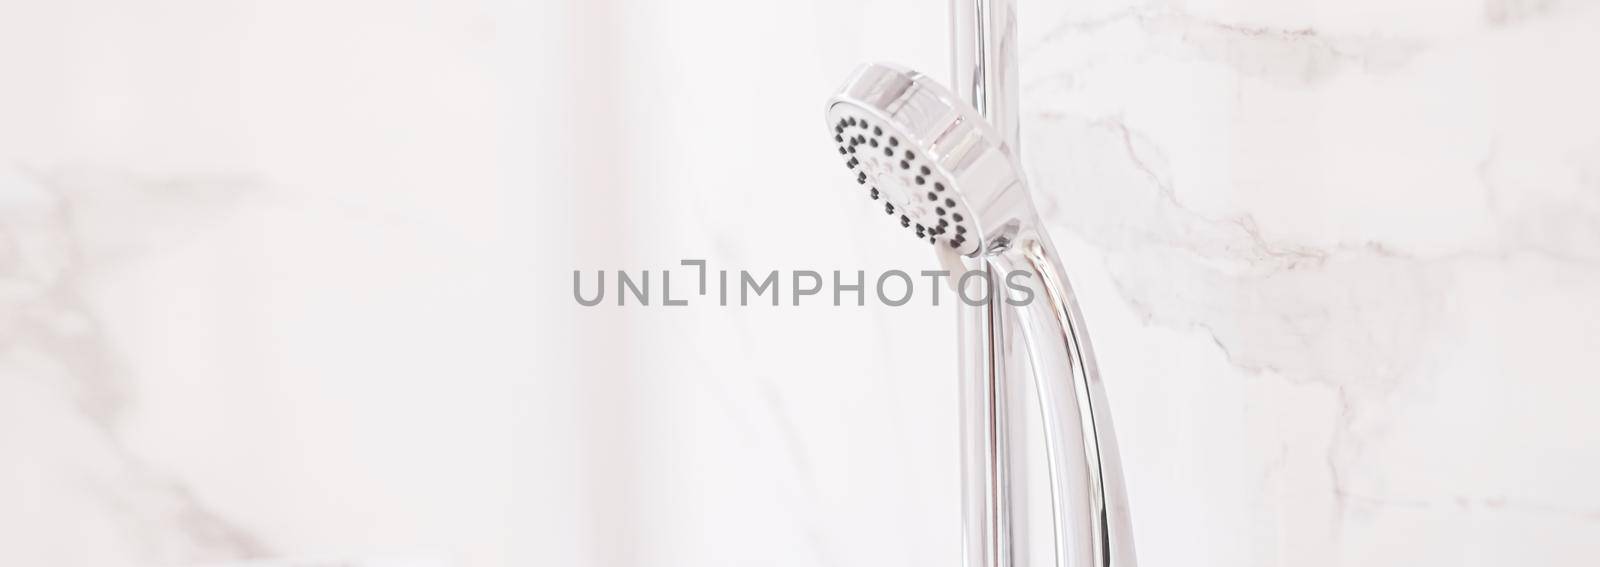 Shower head in luxury bathroom, eco-friendly interior design and sustainable materials by Anneleven